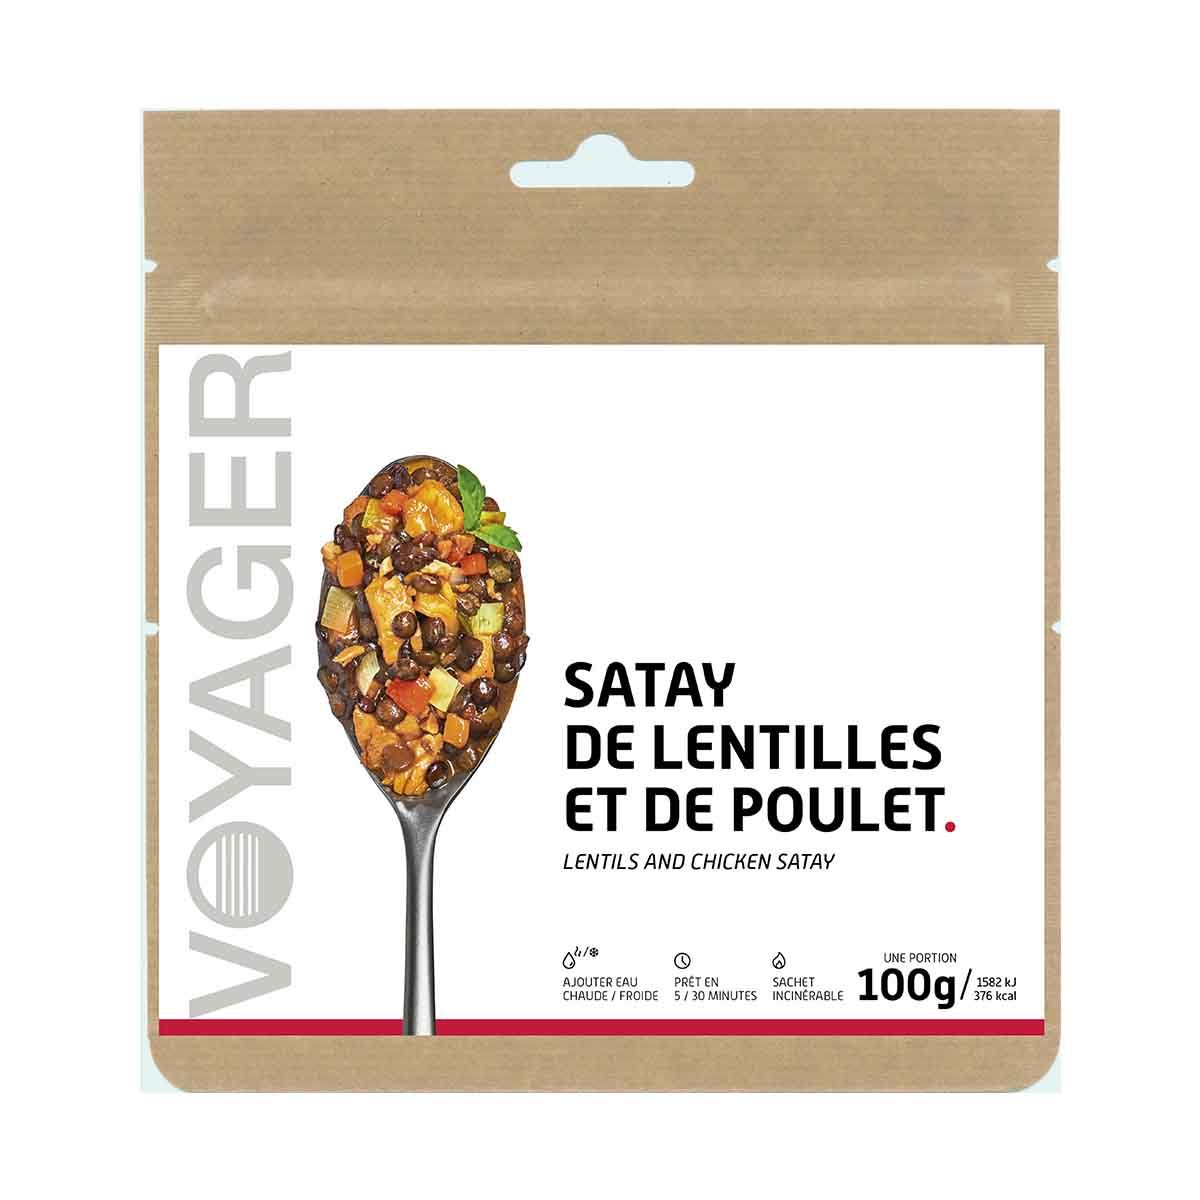 Lentils and chicken satay